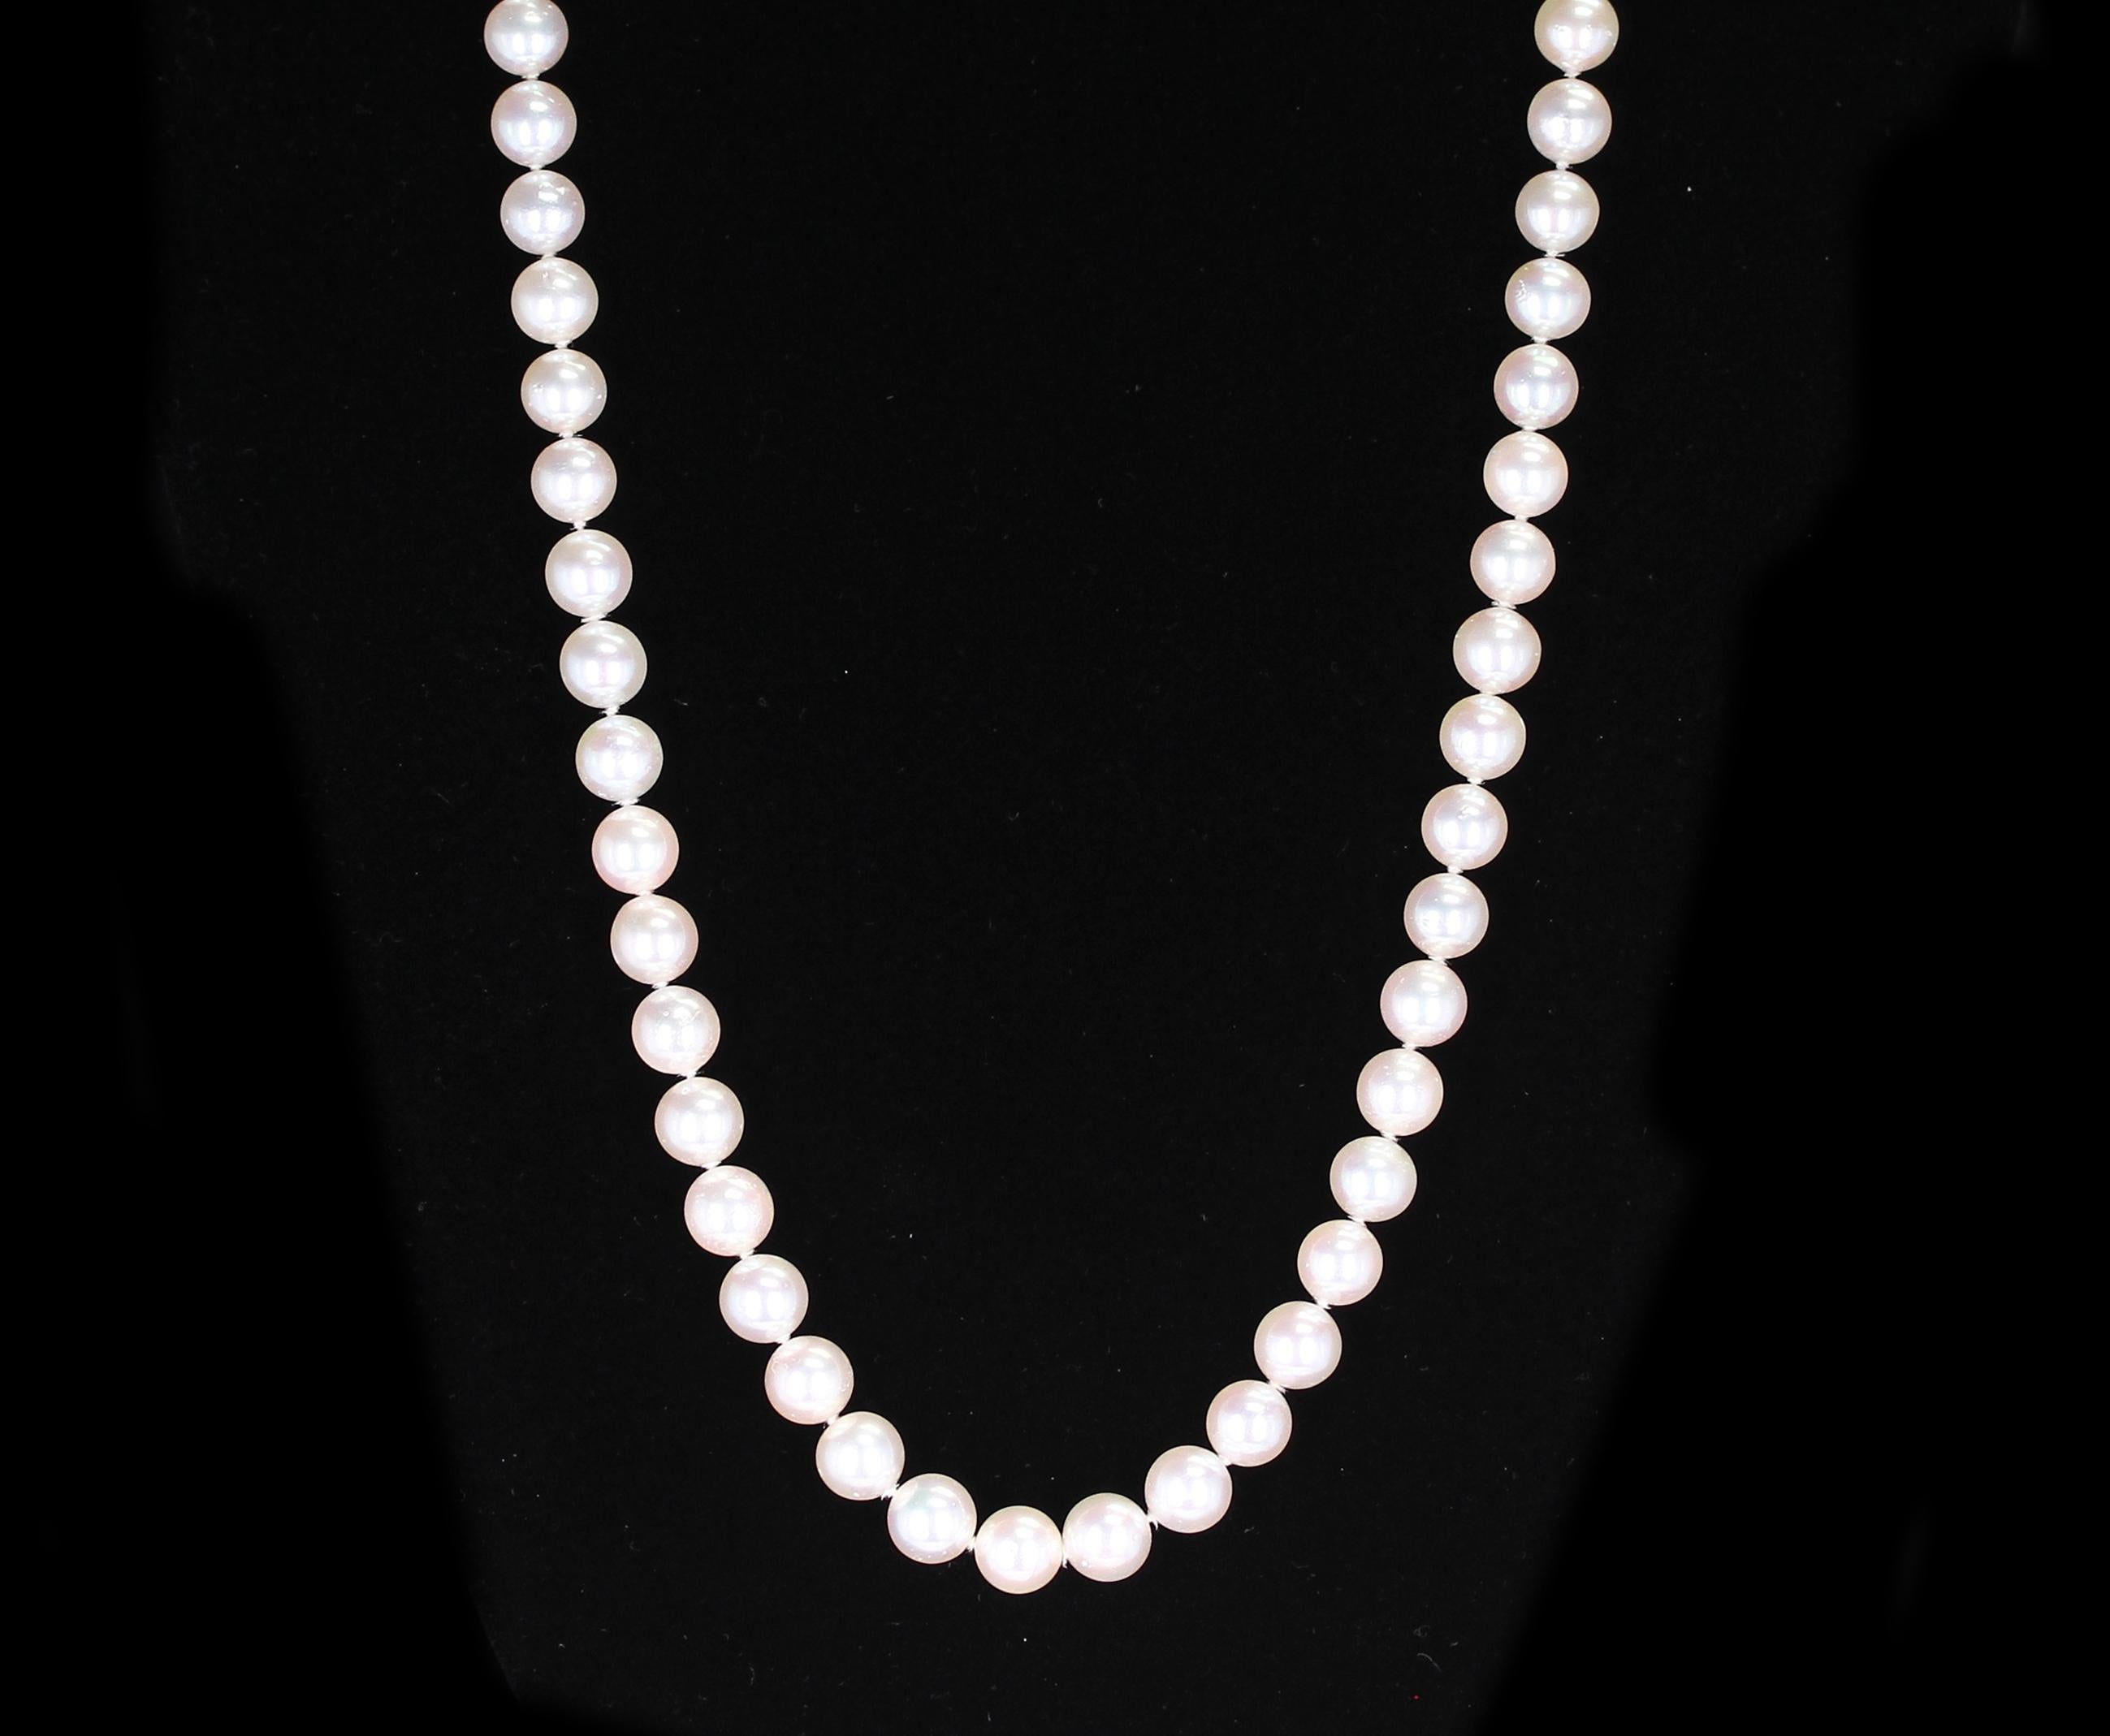 A classic strand of smooth cultured pearls, Length: 33 inches, Weight: 438 cts. Size: 8-8.5MM.